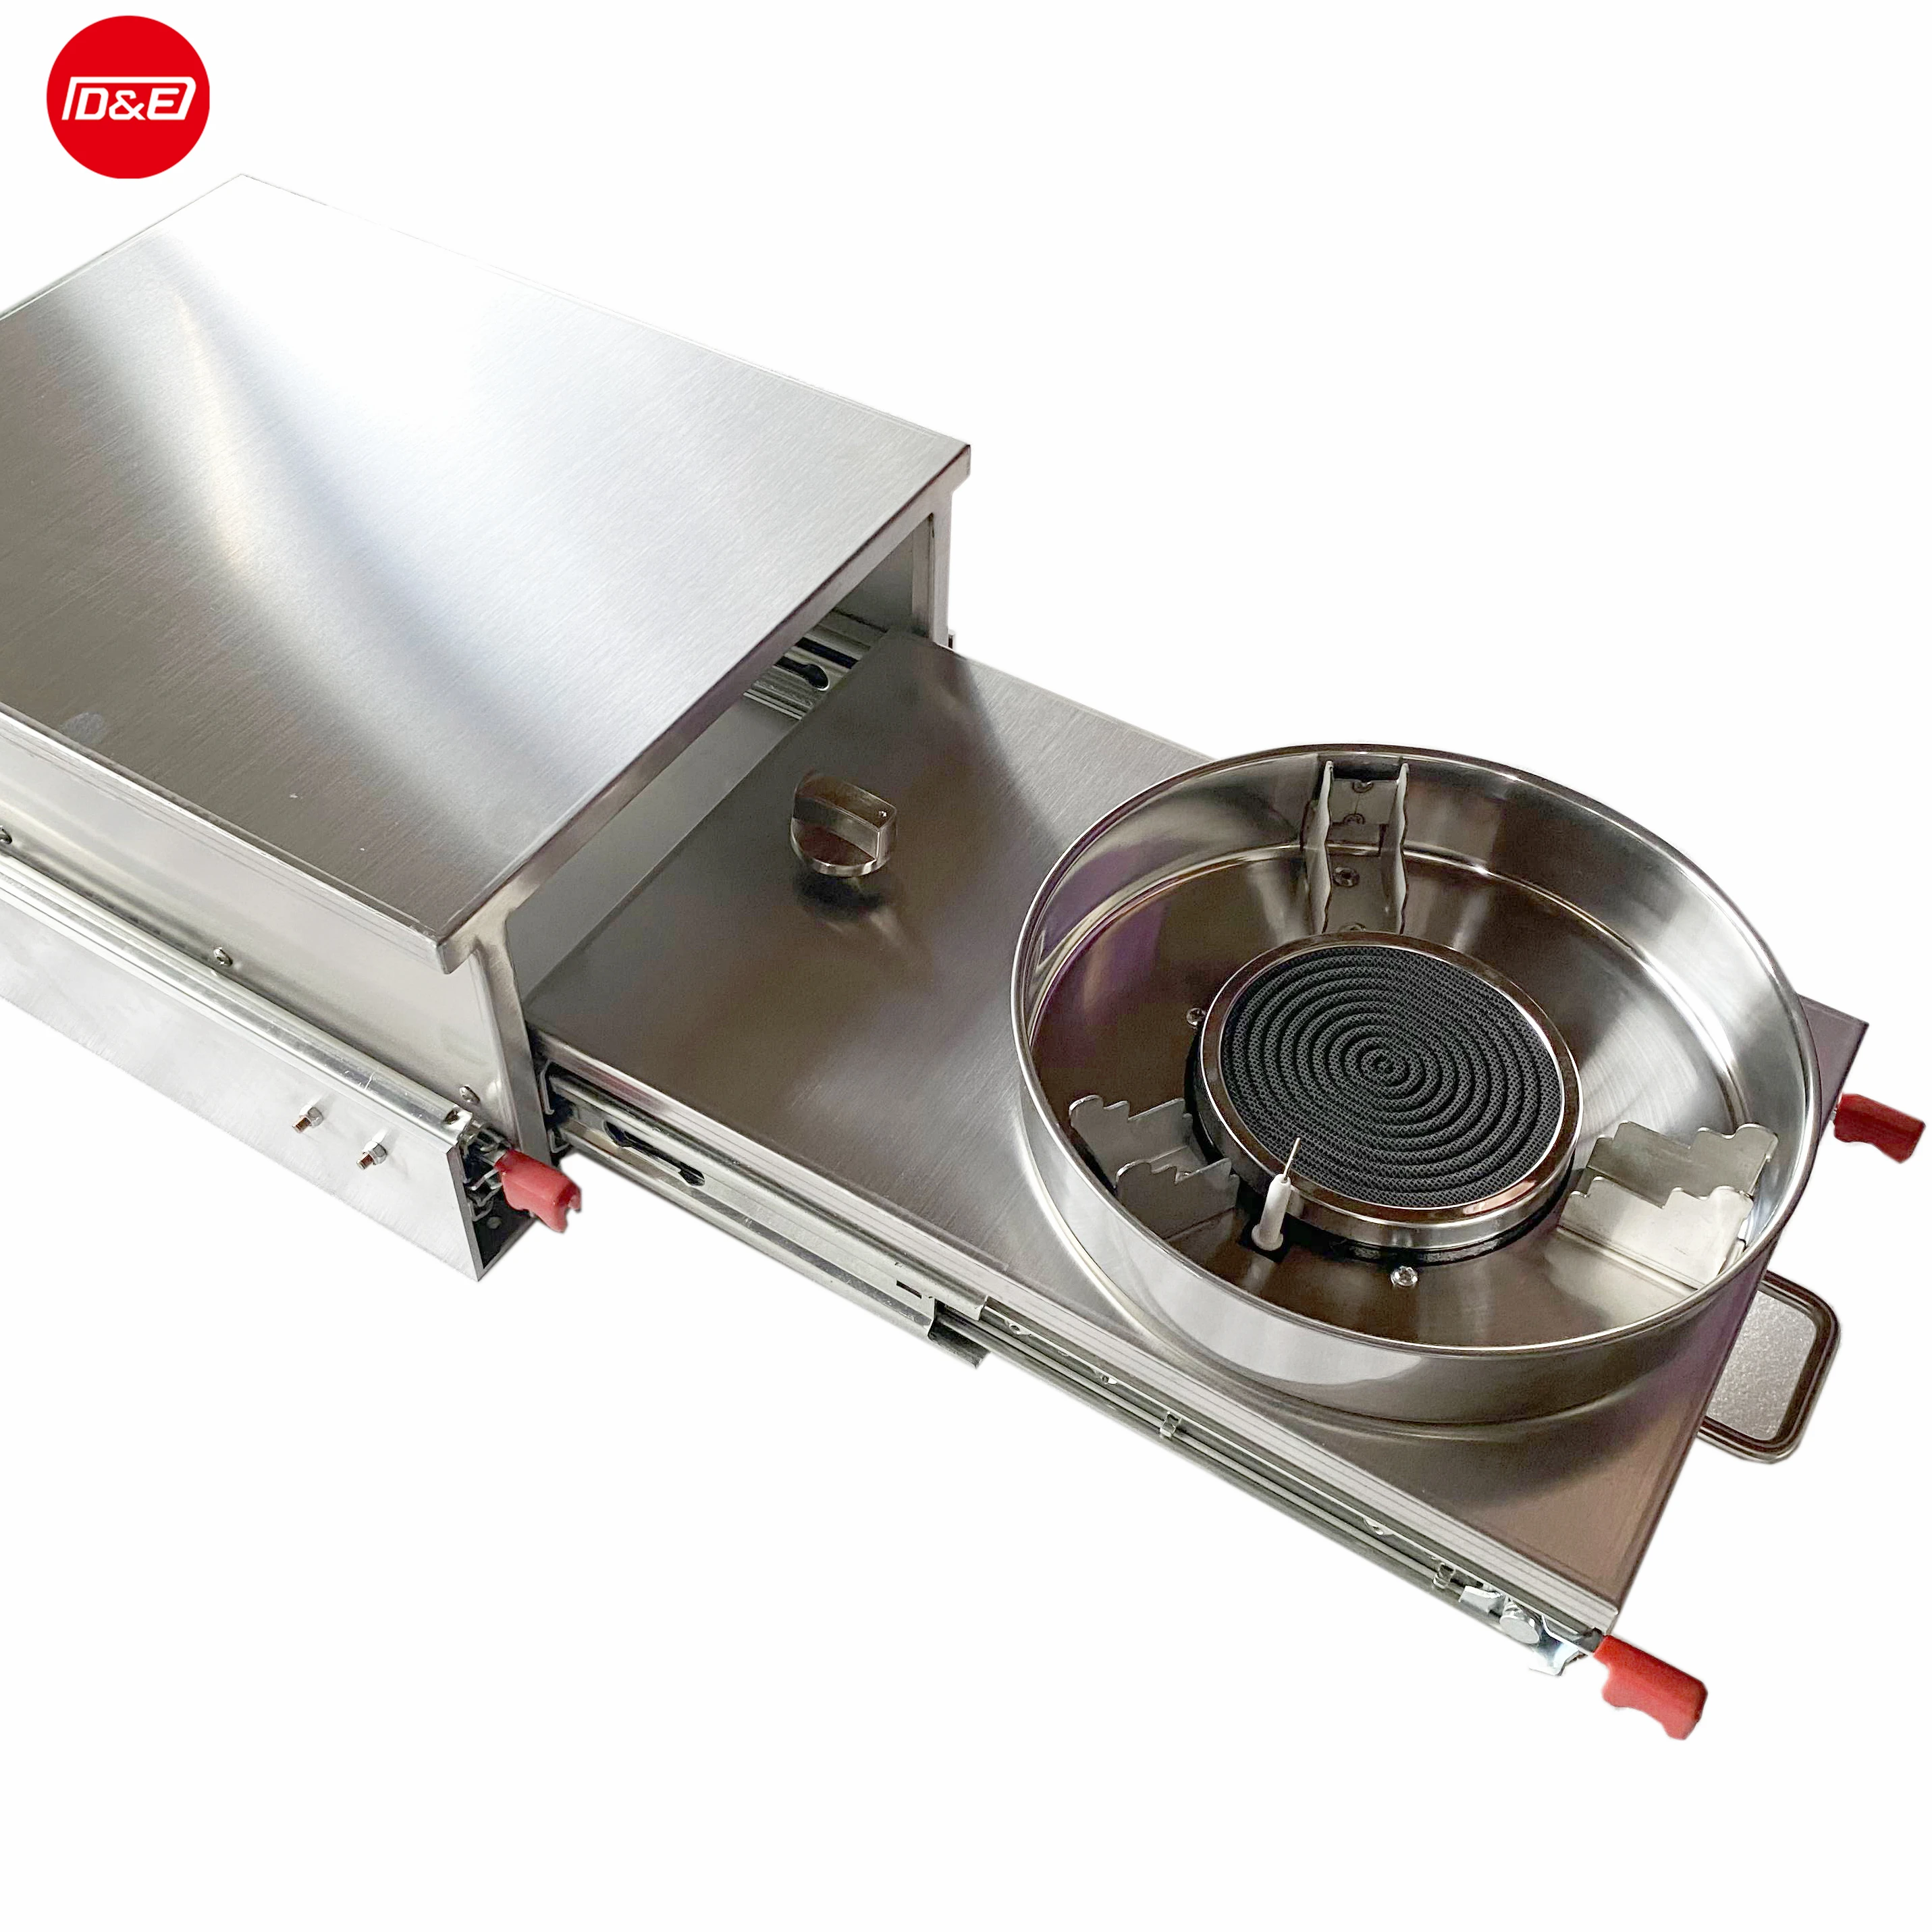 

Hot sale Portable Trailer Extraction Diesel Gas Stove with sink faucet stainless steel RV Camping gas stove similar to Wallas, Customizable